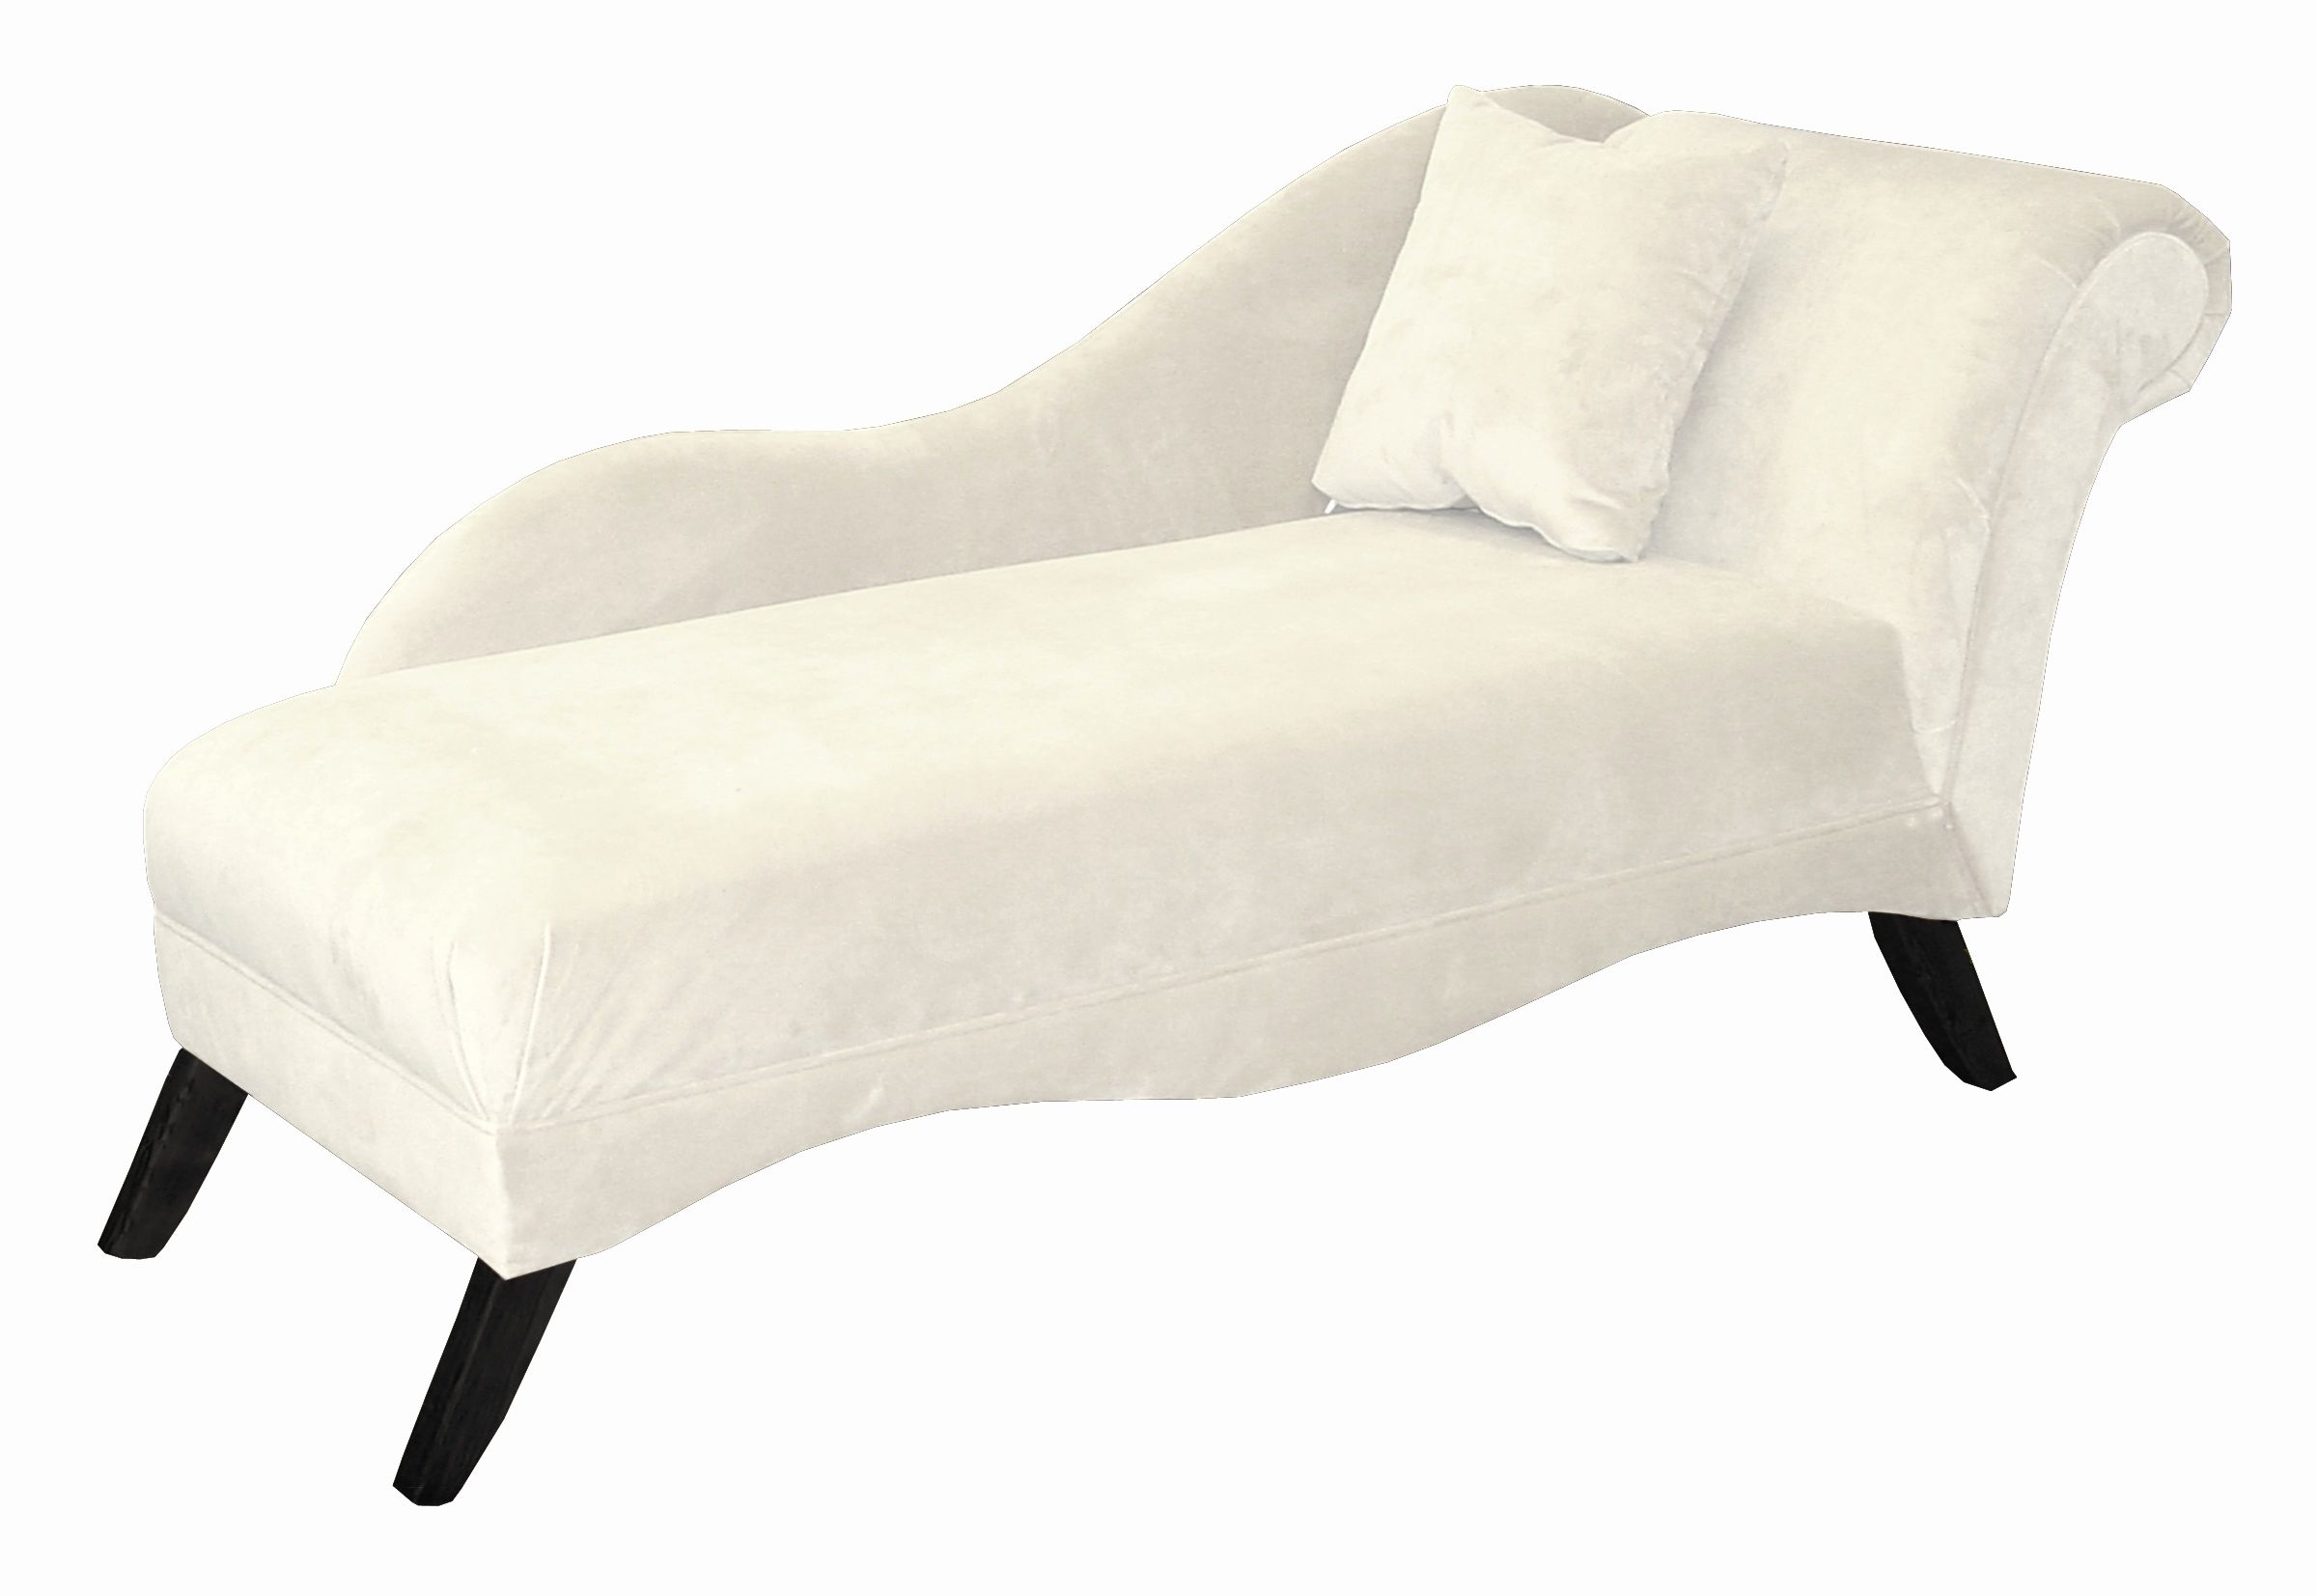 Home Improvement Regarding Most Recently Released Adelaide Chaise Lounge Chairs (View 12 of 15)